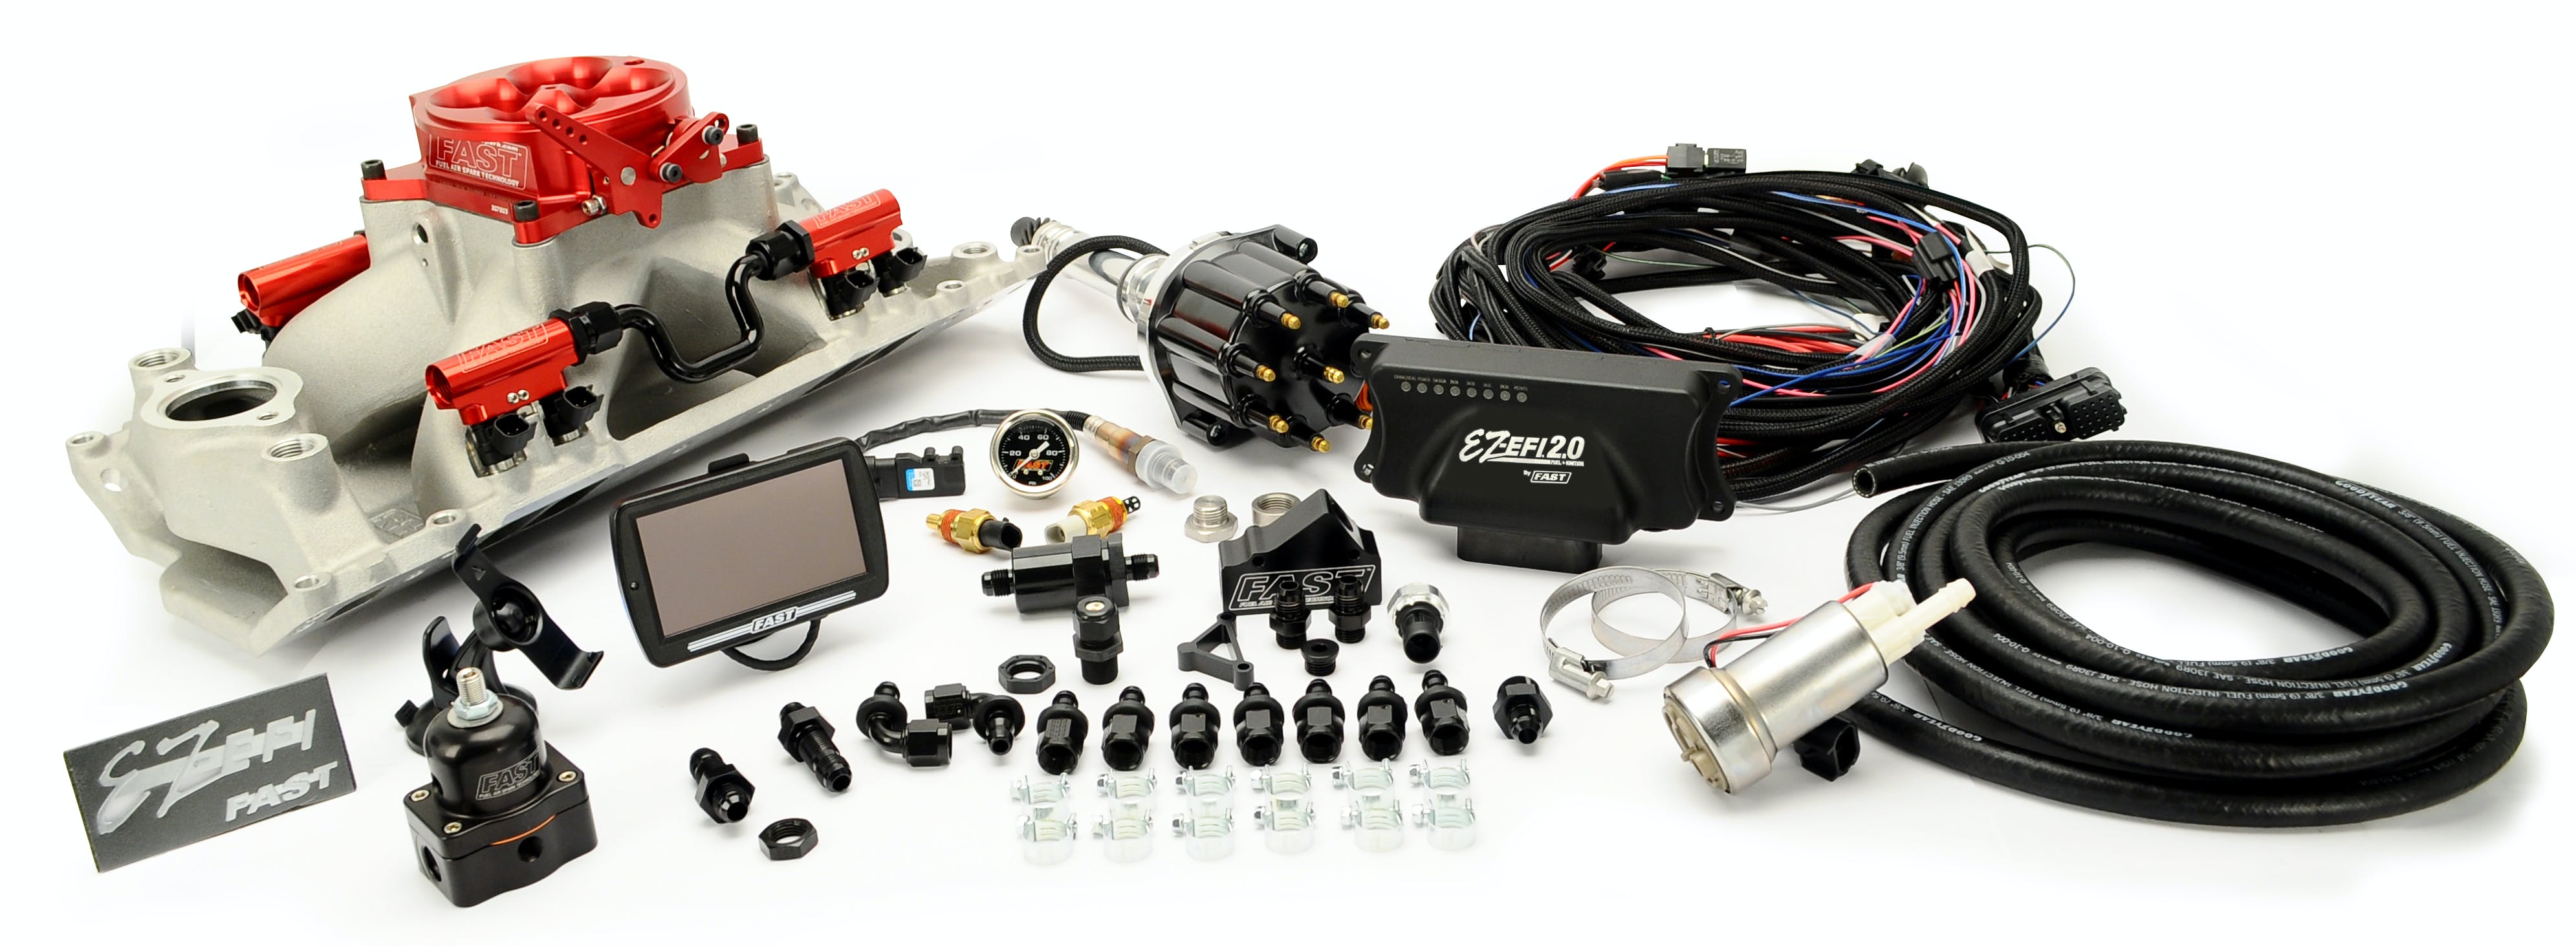 FAST - Fuel Air Spark Technology 30411-05T EZ 2.0 BBC Multiportw/intake, rails, throttle body, distributor and fuel pump